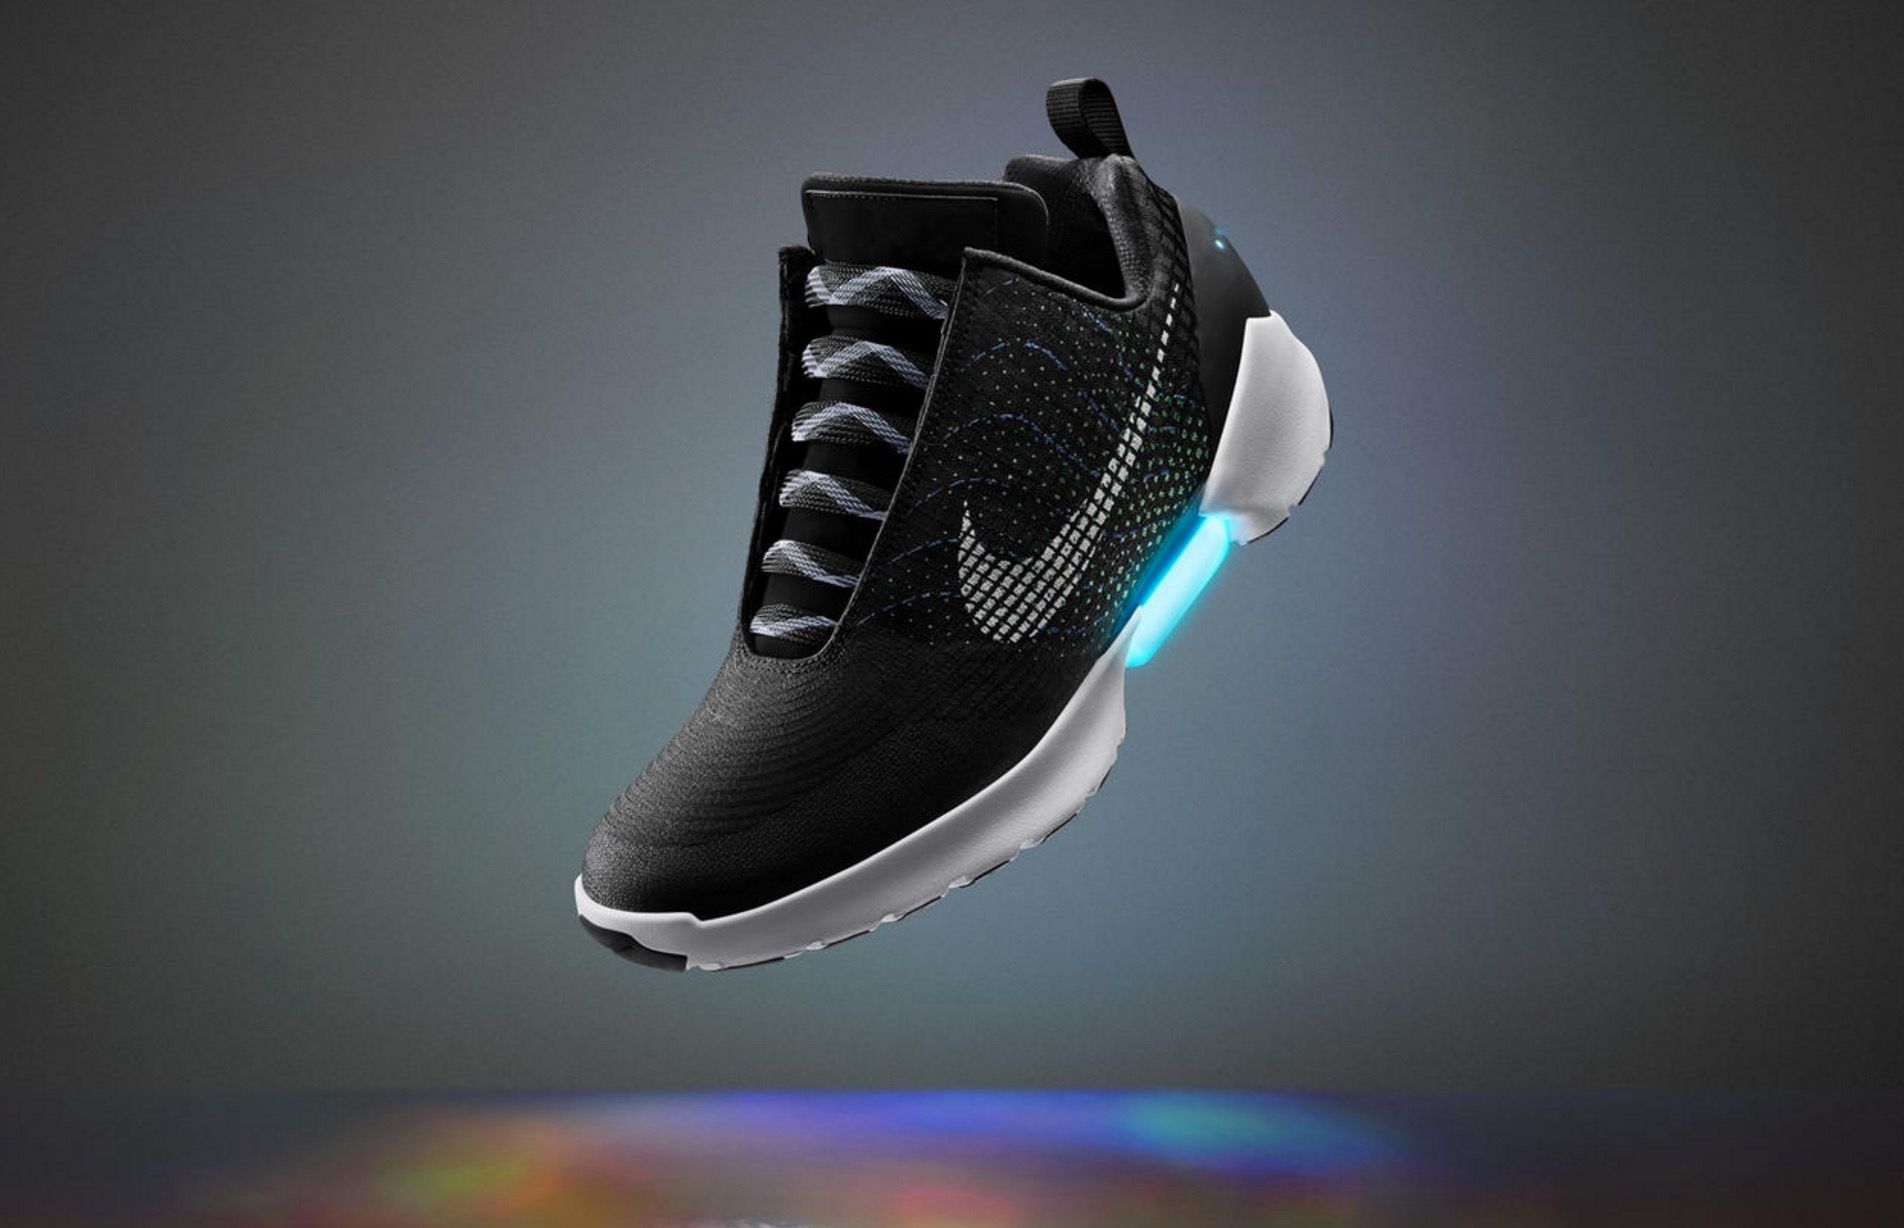 nike hyperadapt 1 0 are the bttf trainers with powerlaces you can actually own image 1